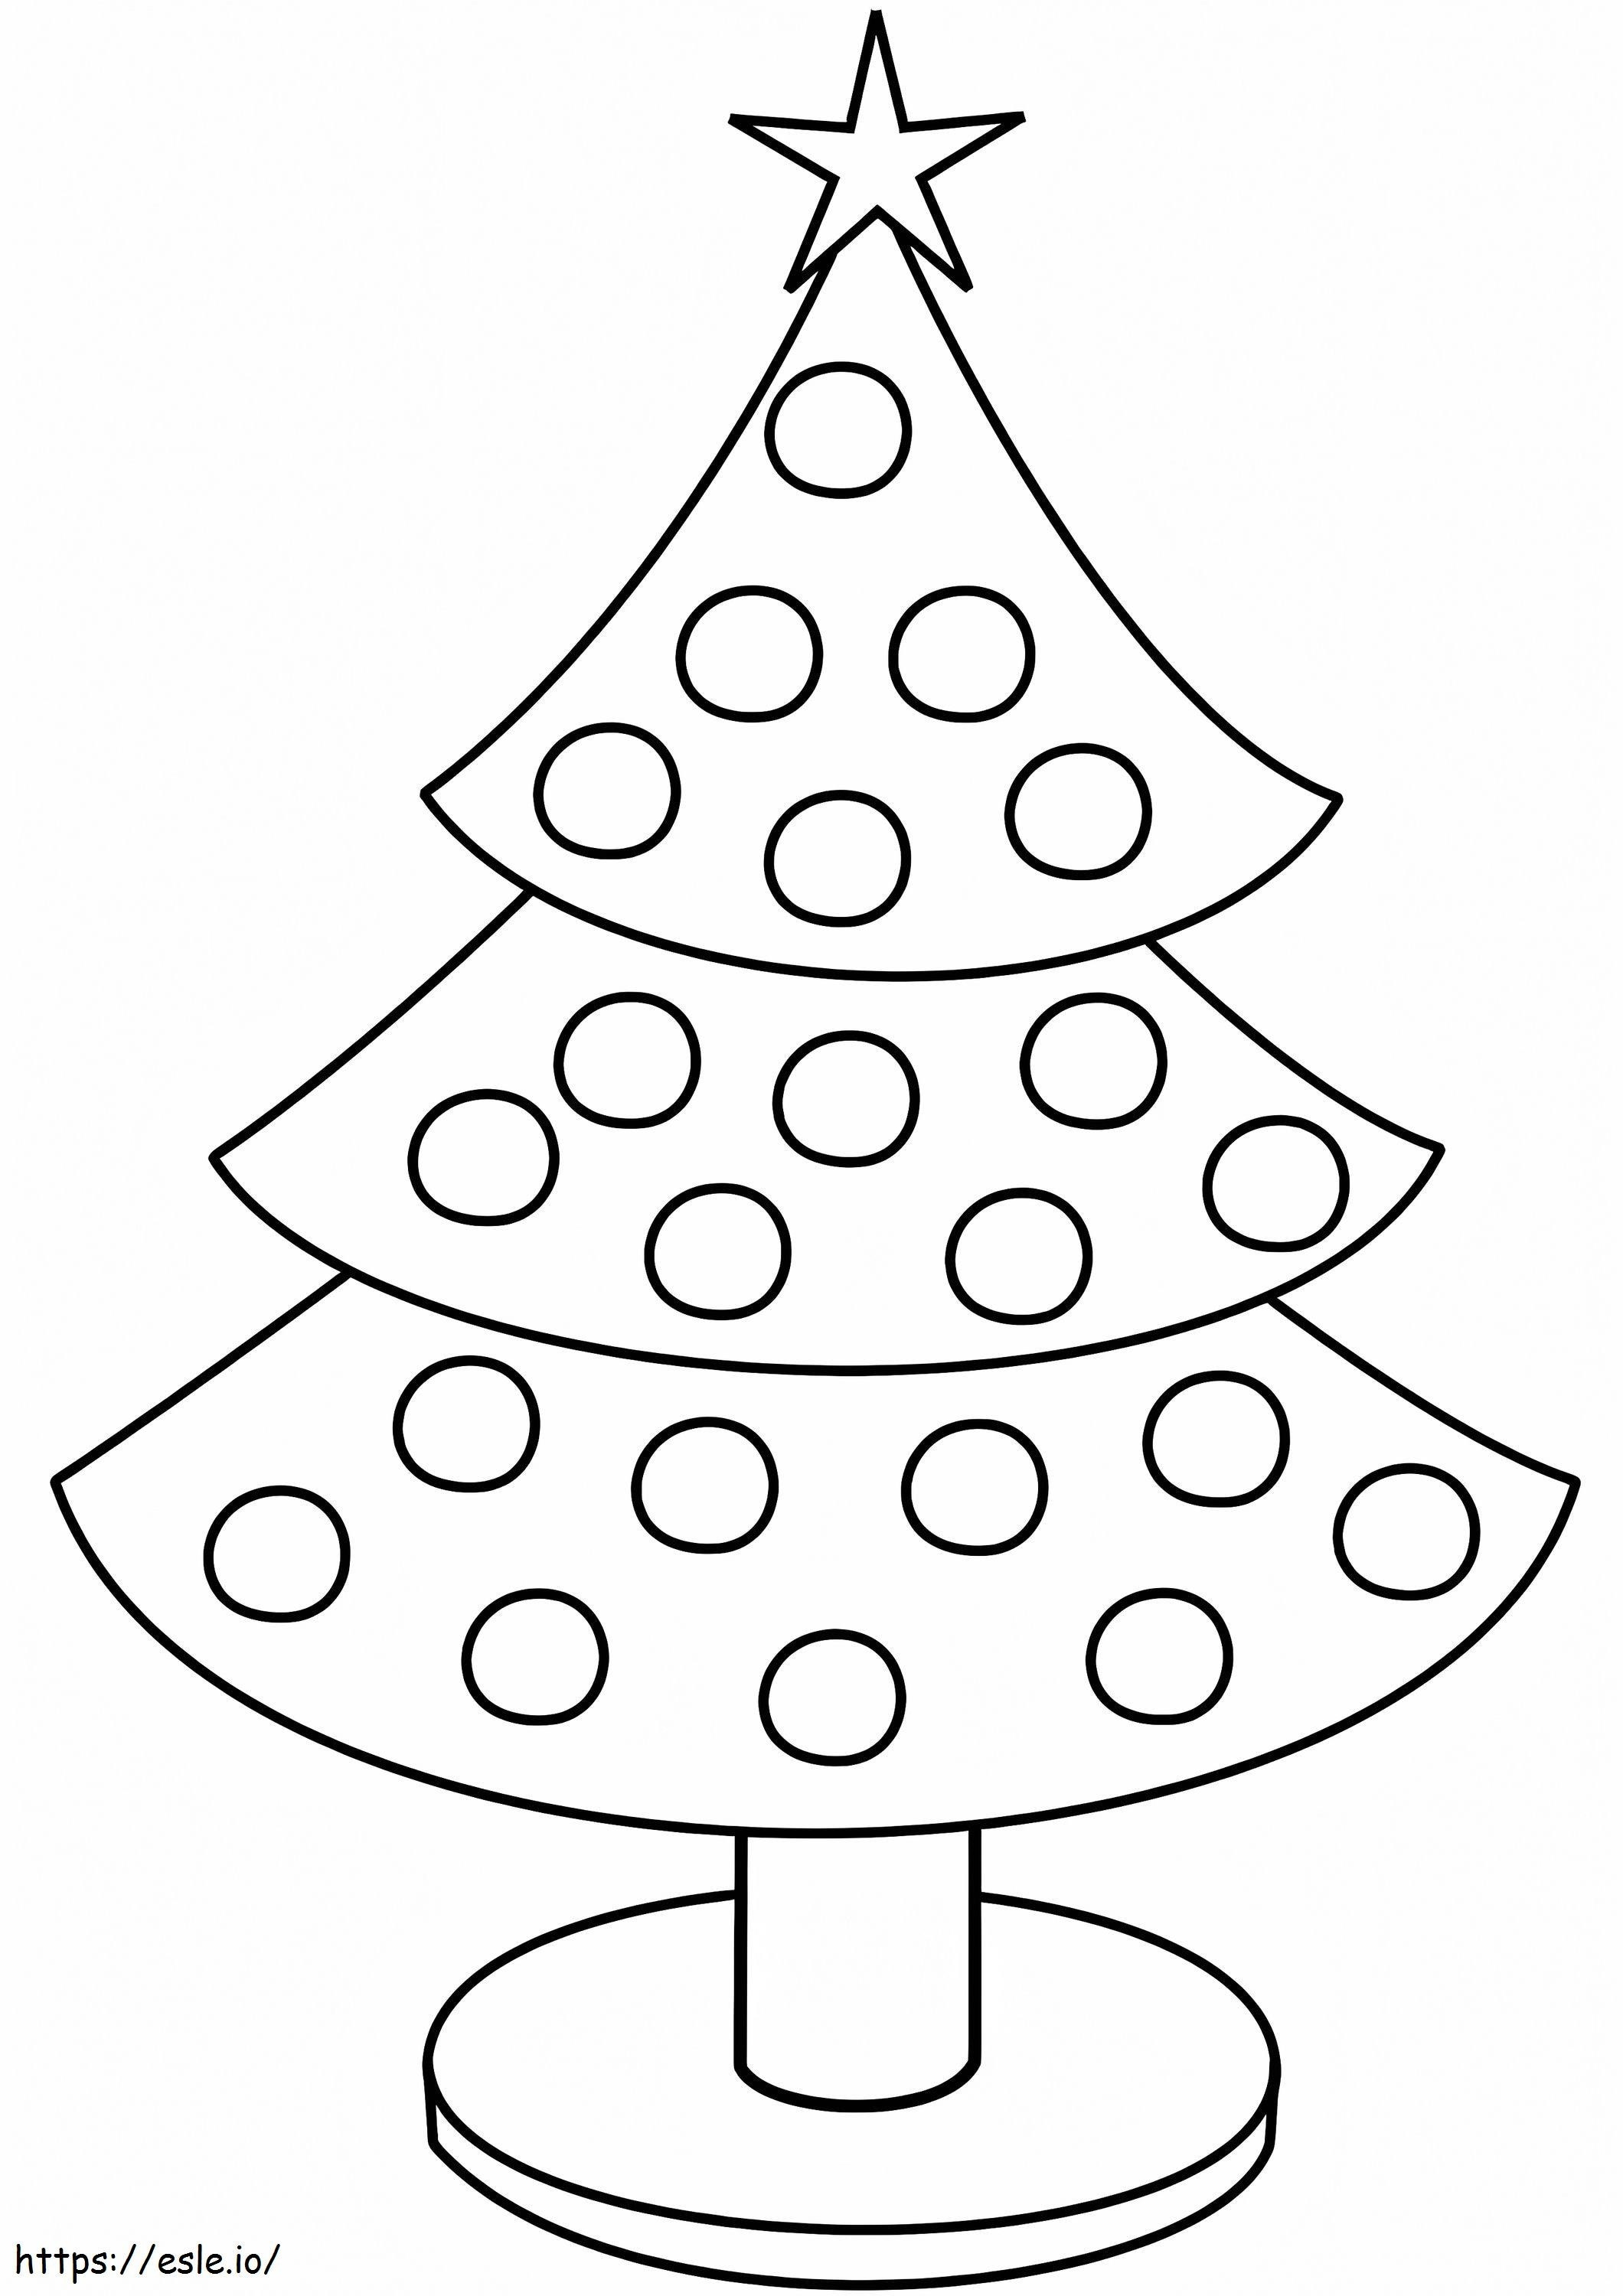 Simple Christmas Tree 3 coloring page